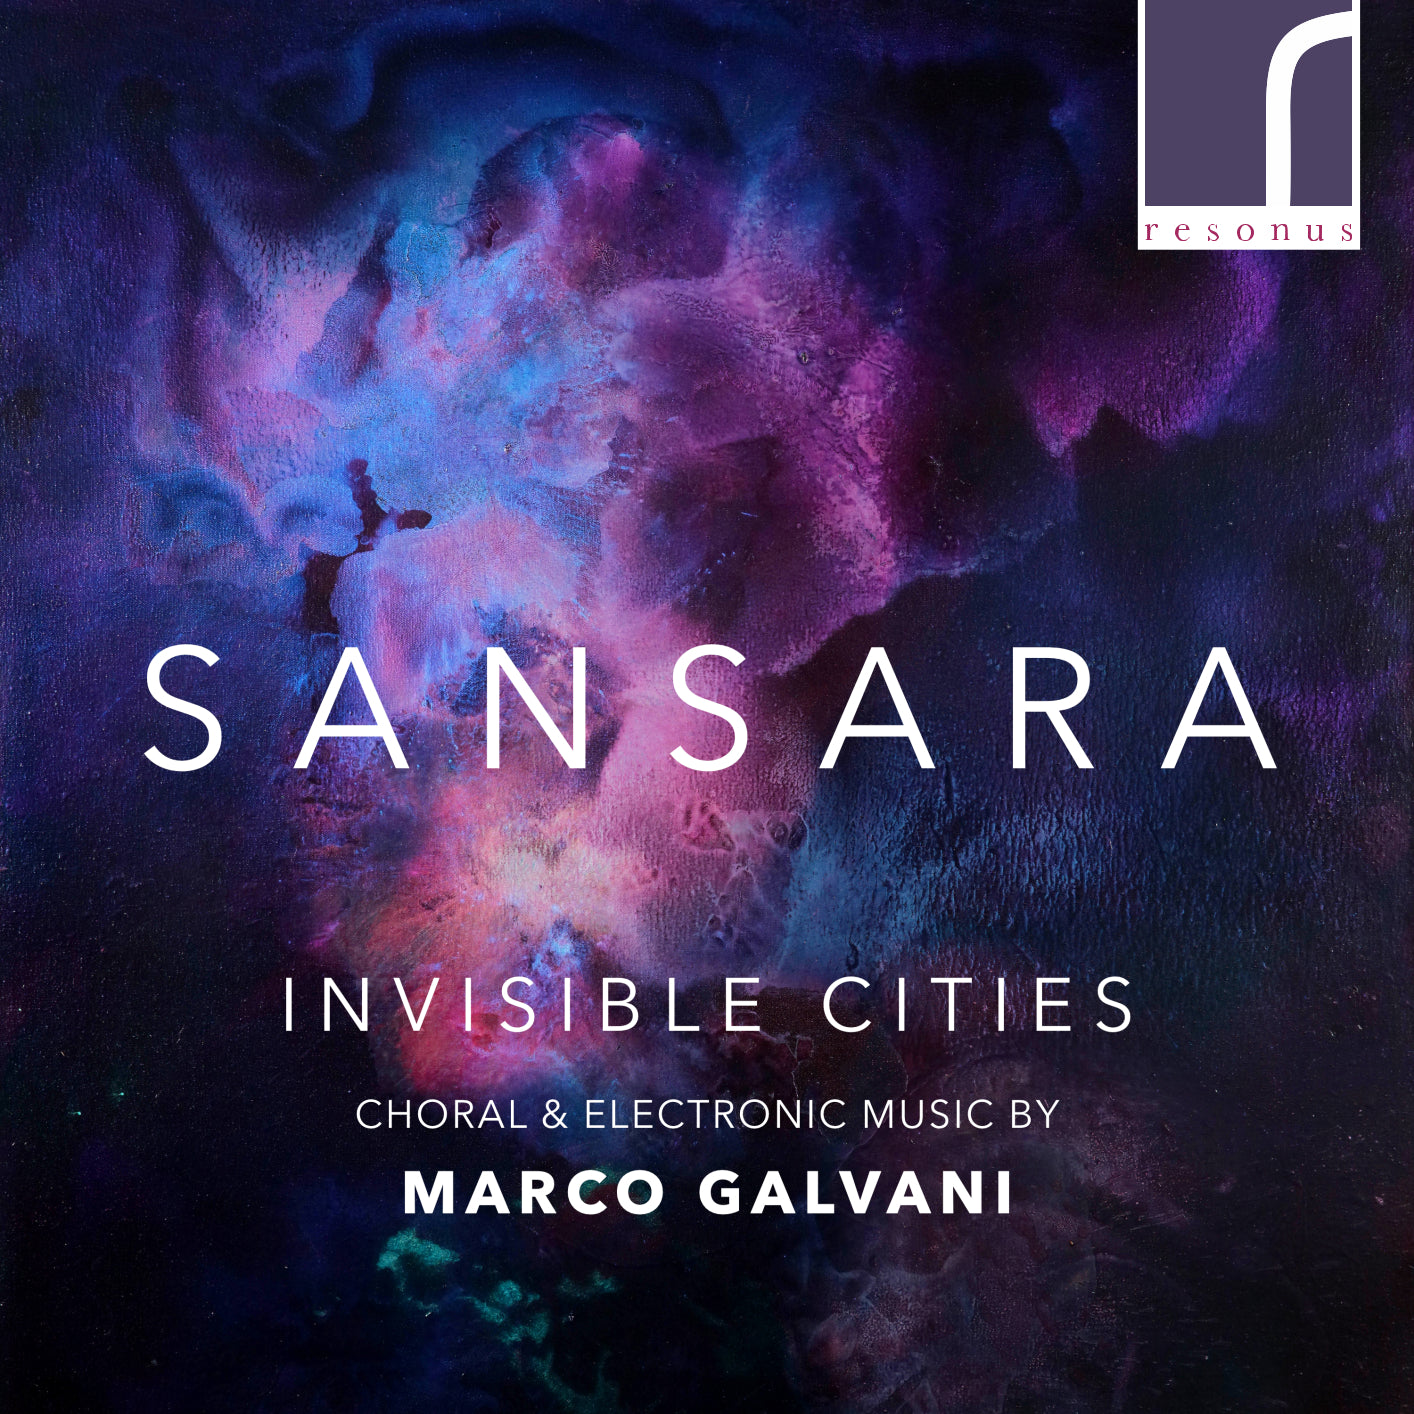 Invisible Cities: Choral & Electronic Music by Marco Galvani